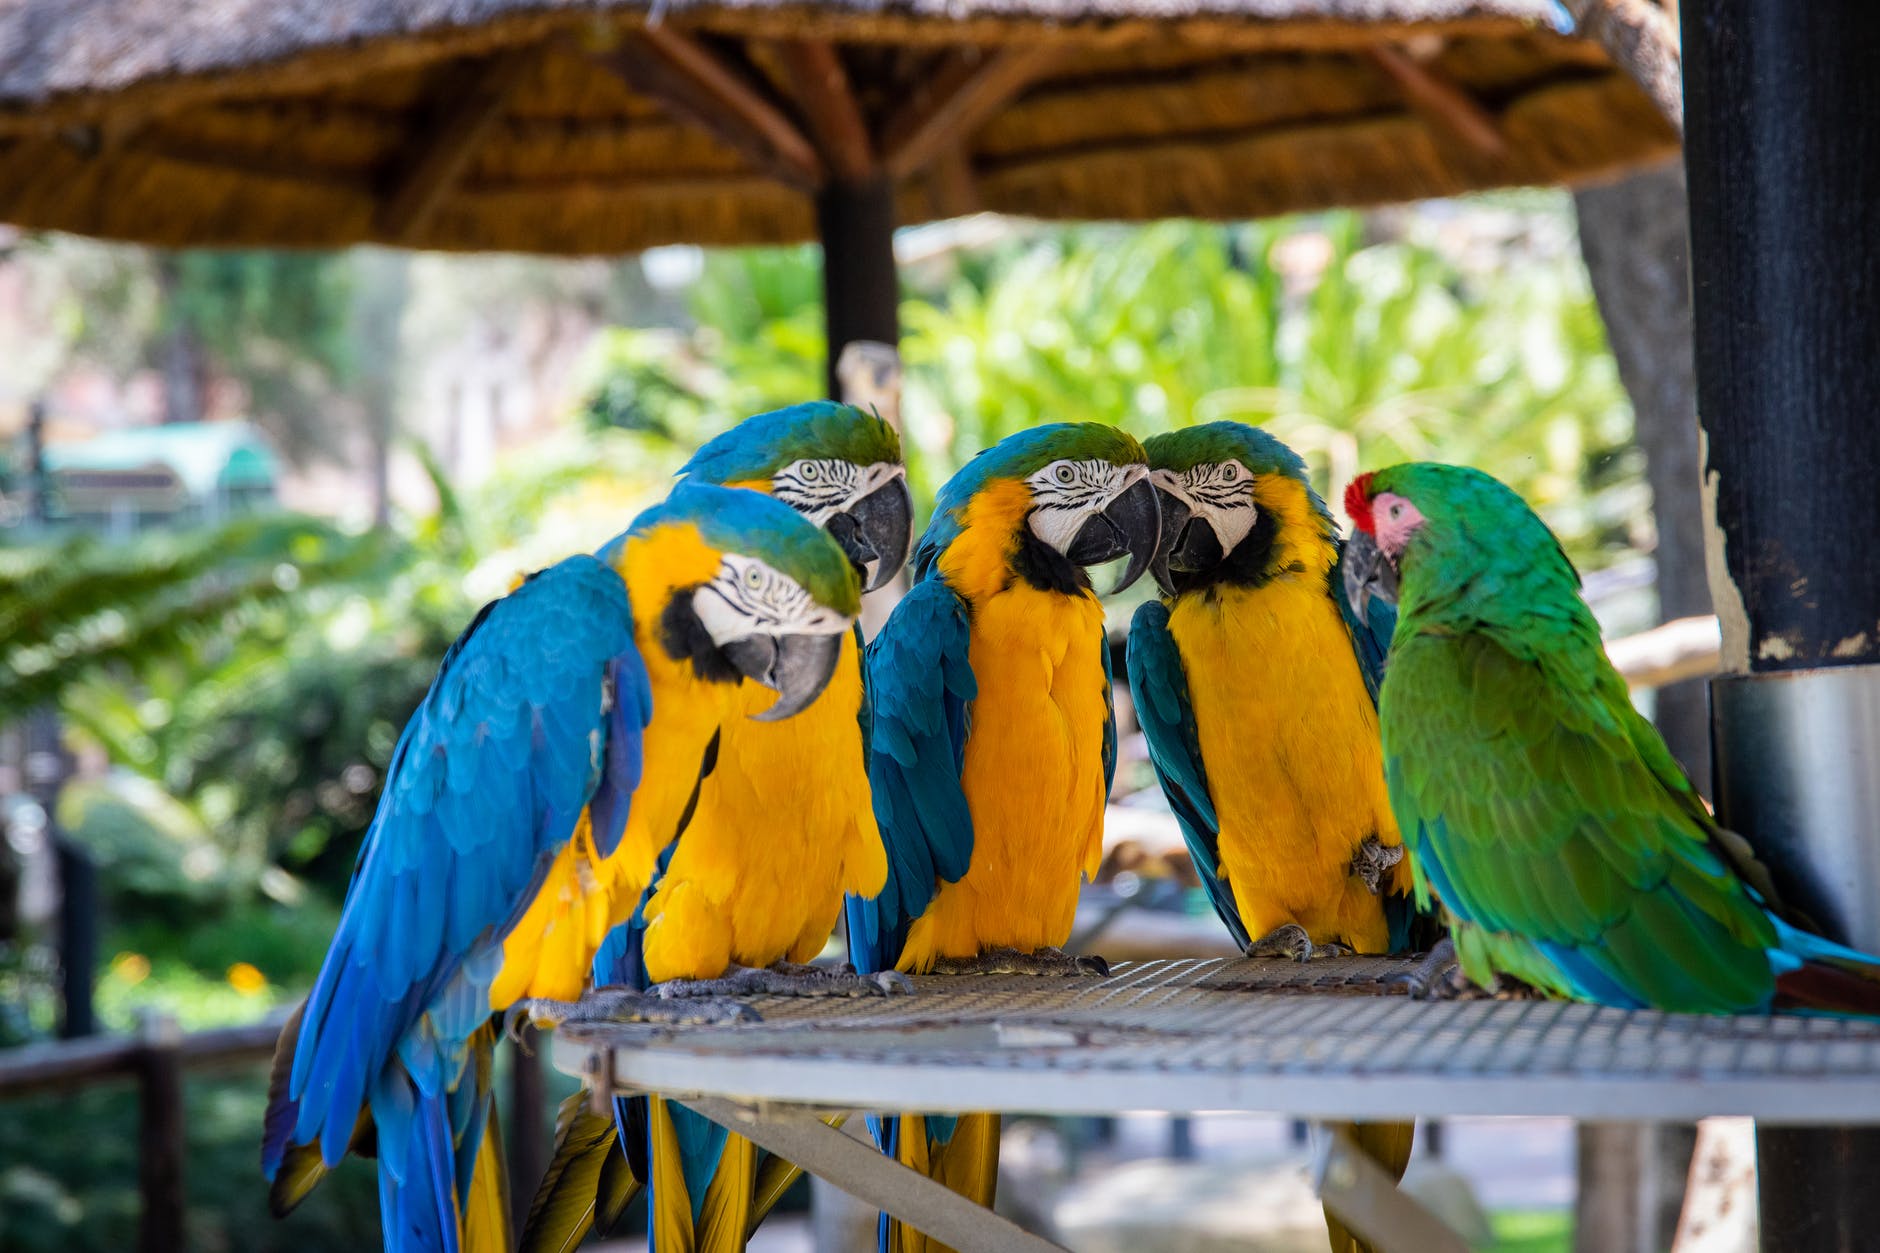 five parrots perched on brown wooden surface